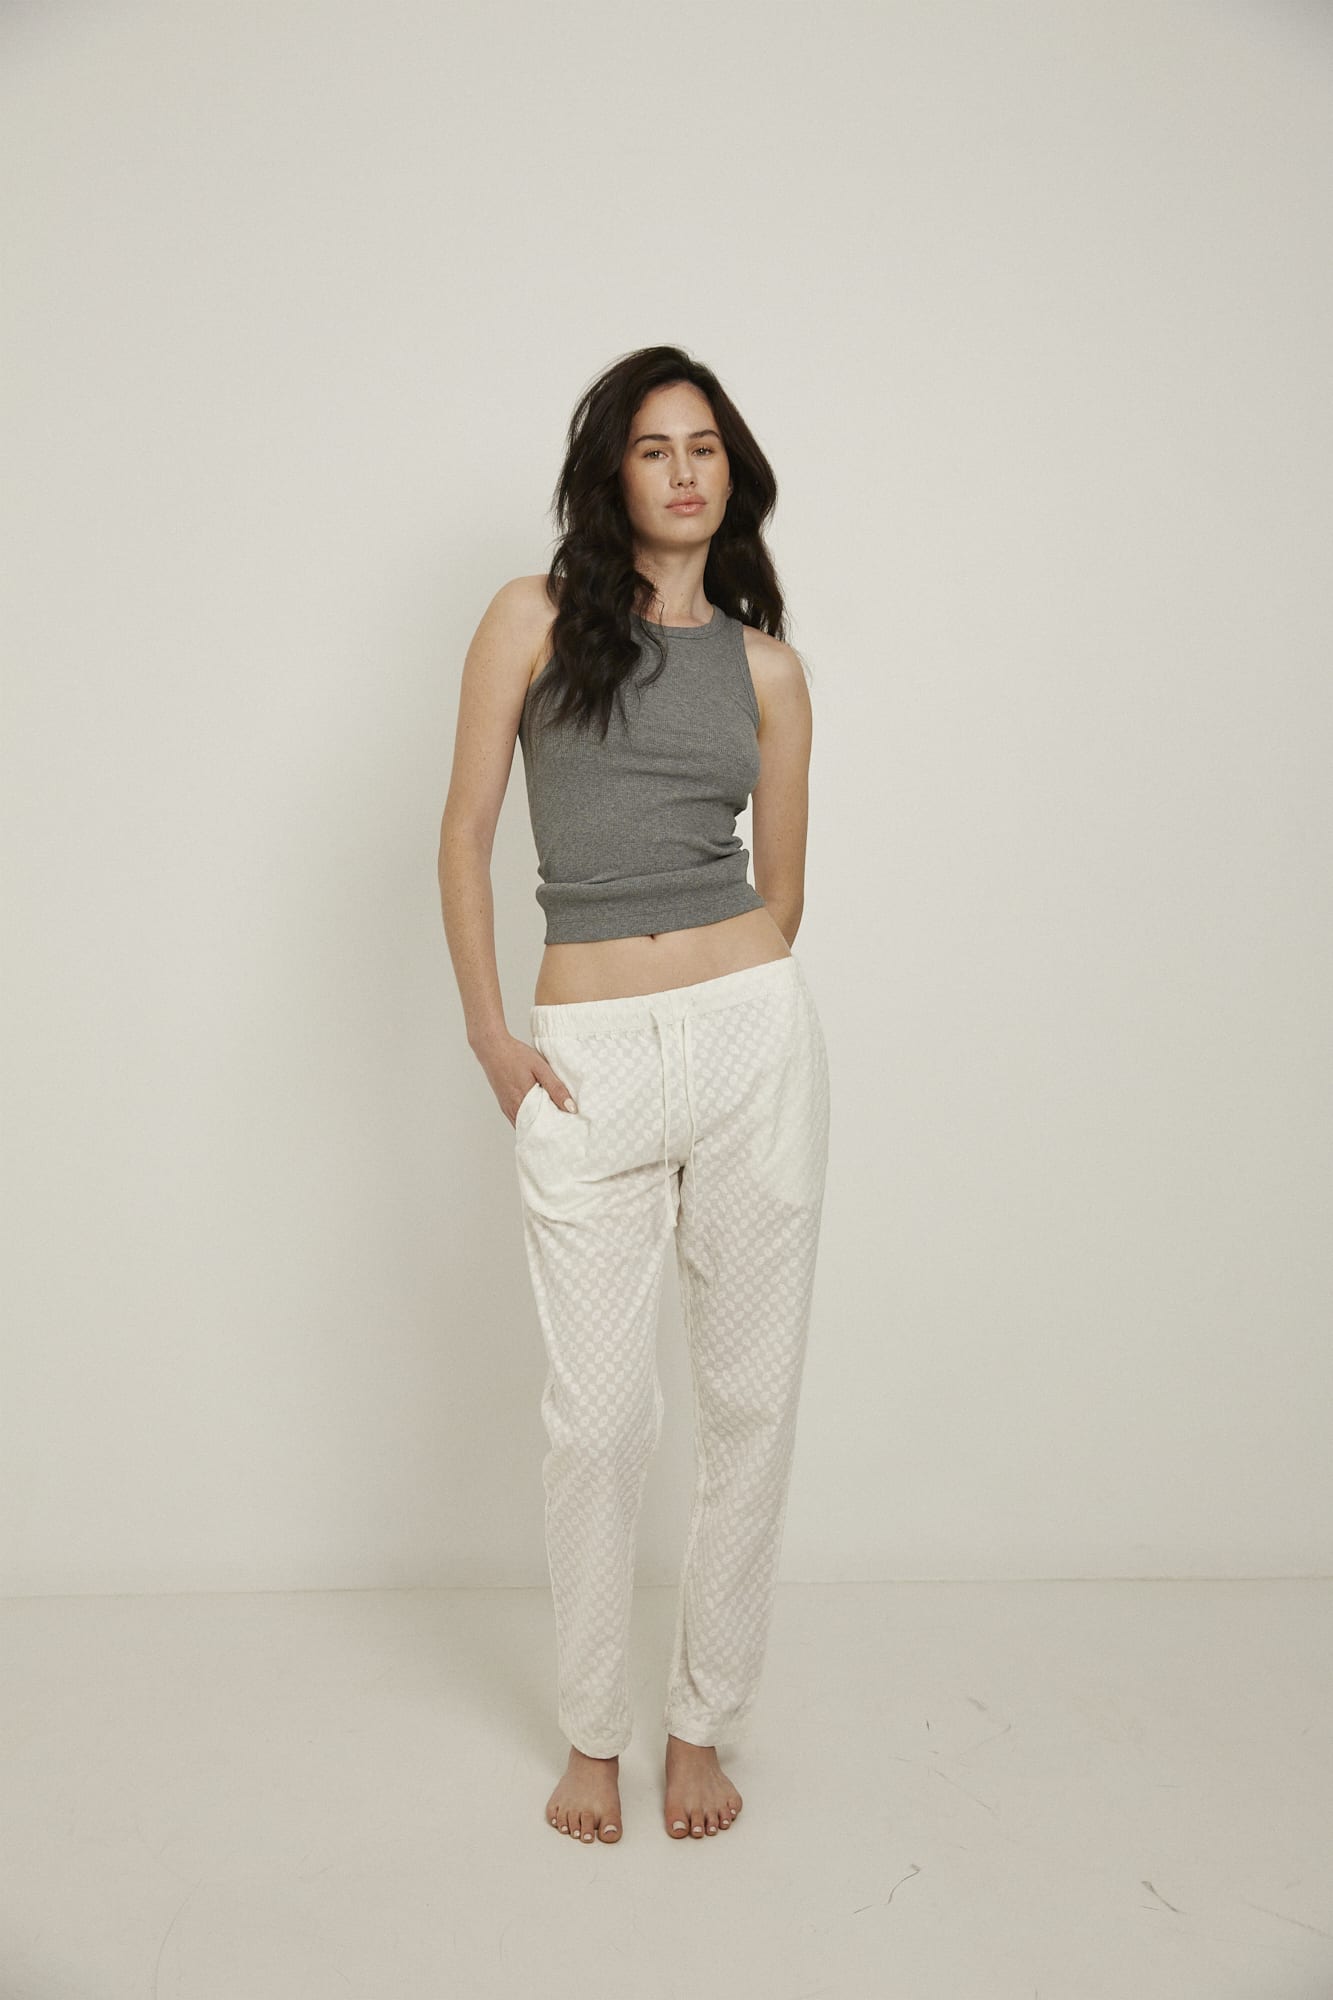 Women’s pyjama pant.  Made from 100% organic cotton, in white colour featuring delicate all over embroidery. These pants feature an elasticated waistband with a drawstring for comfort.